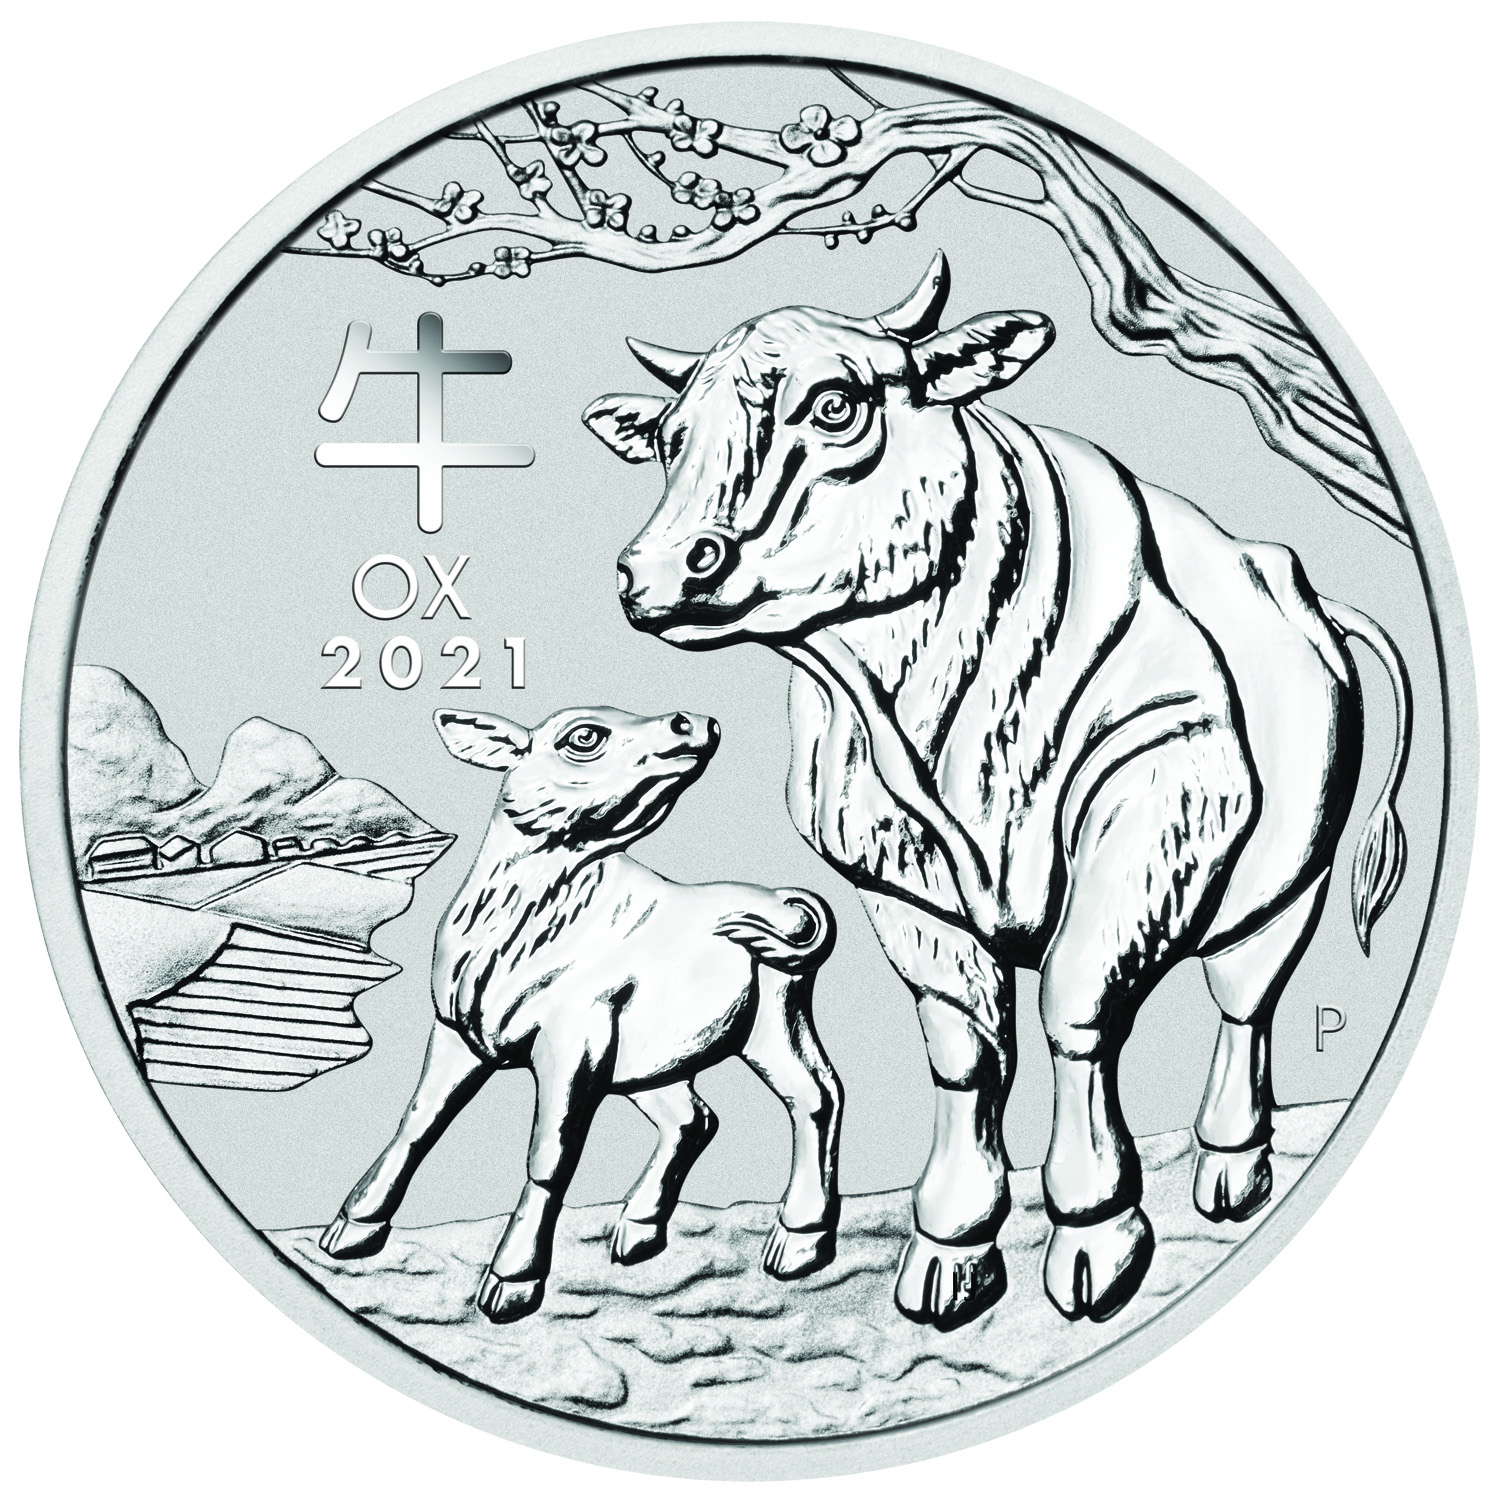 Details about   2021 P Australia Year of Ox 1 oz Silver High Relief Lunar SeriesIII Proof Coin 